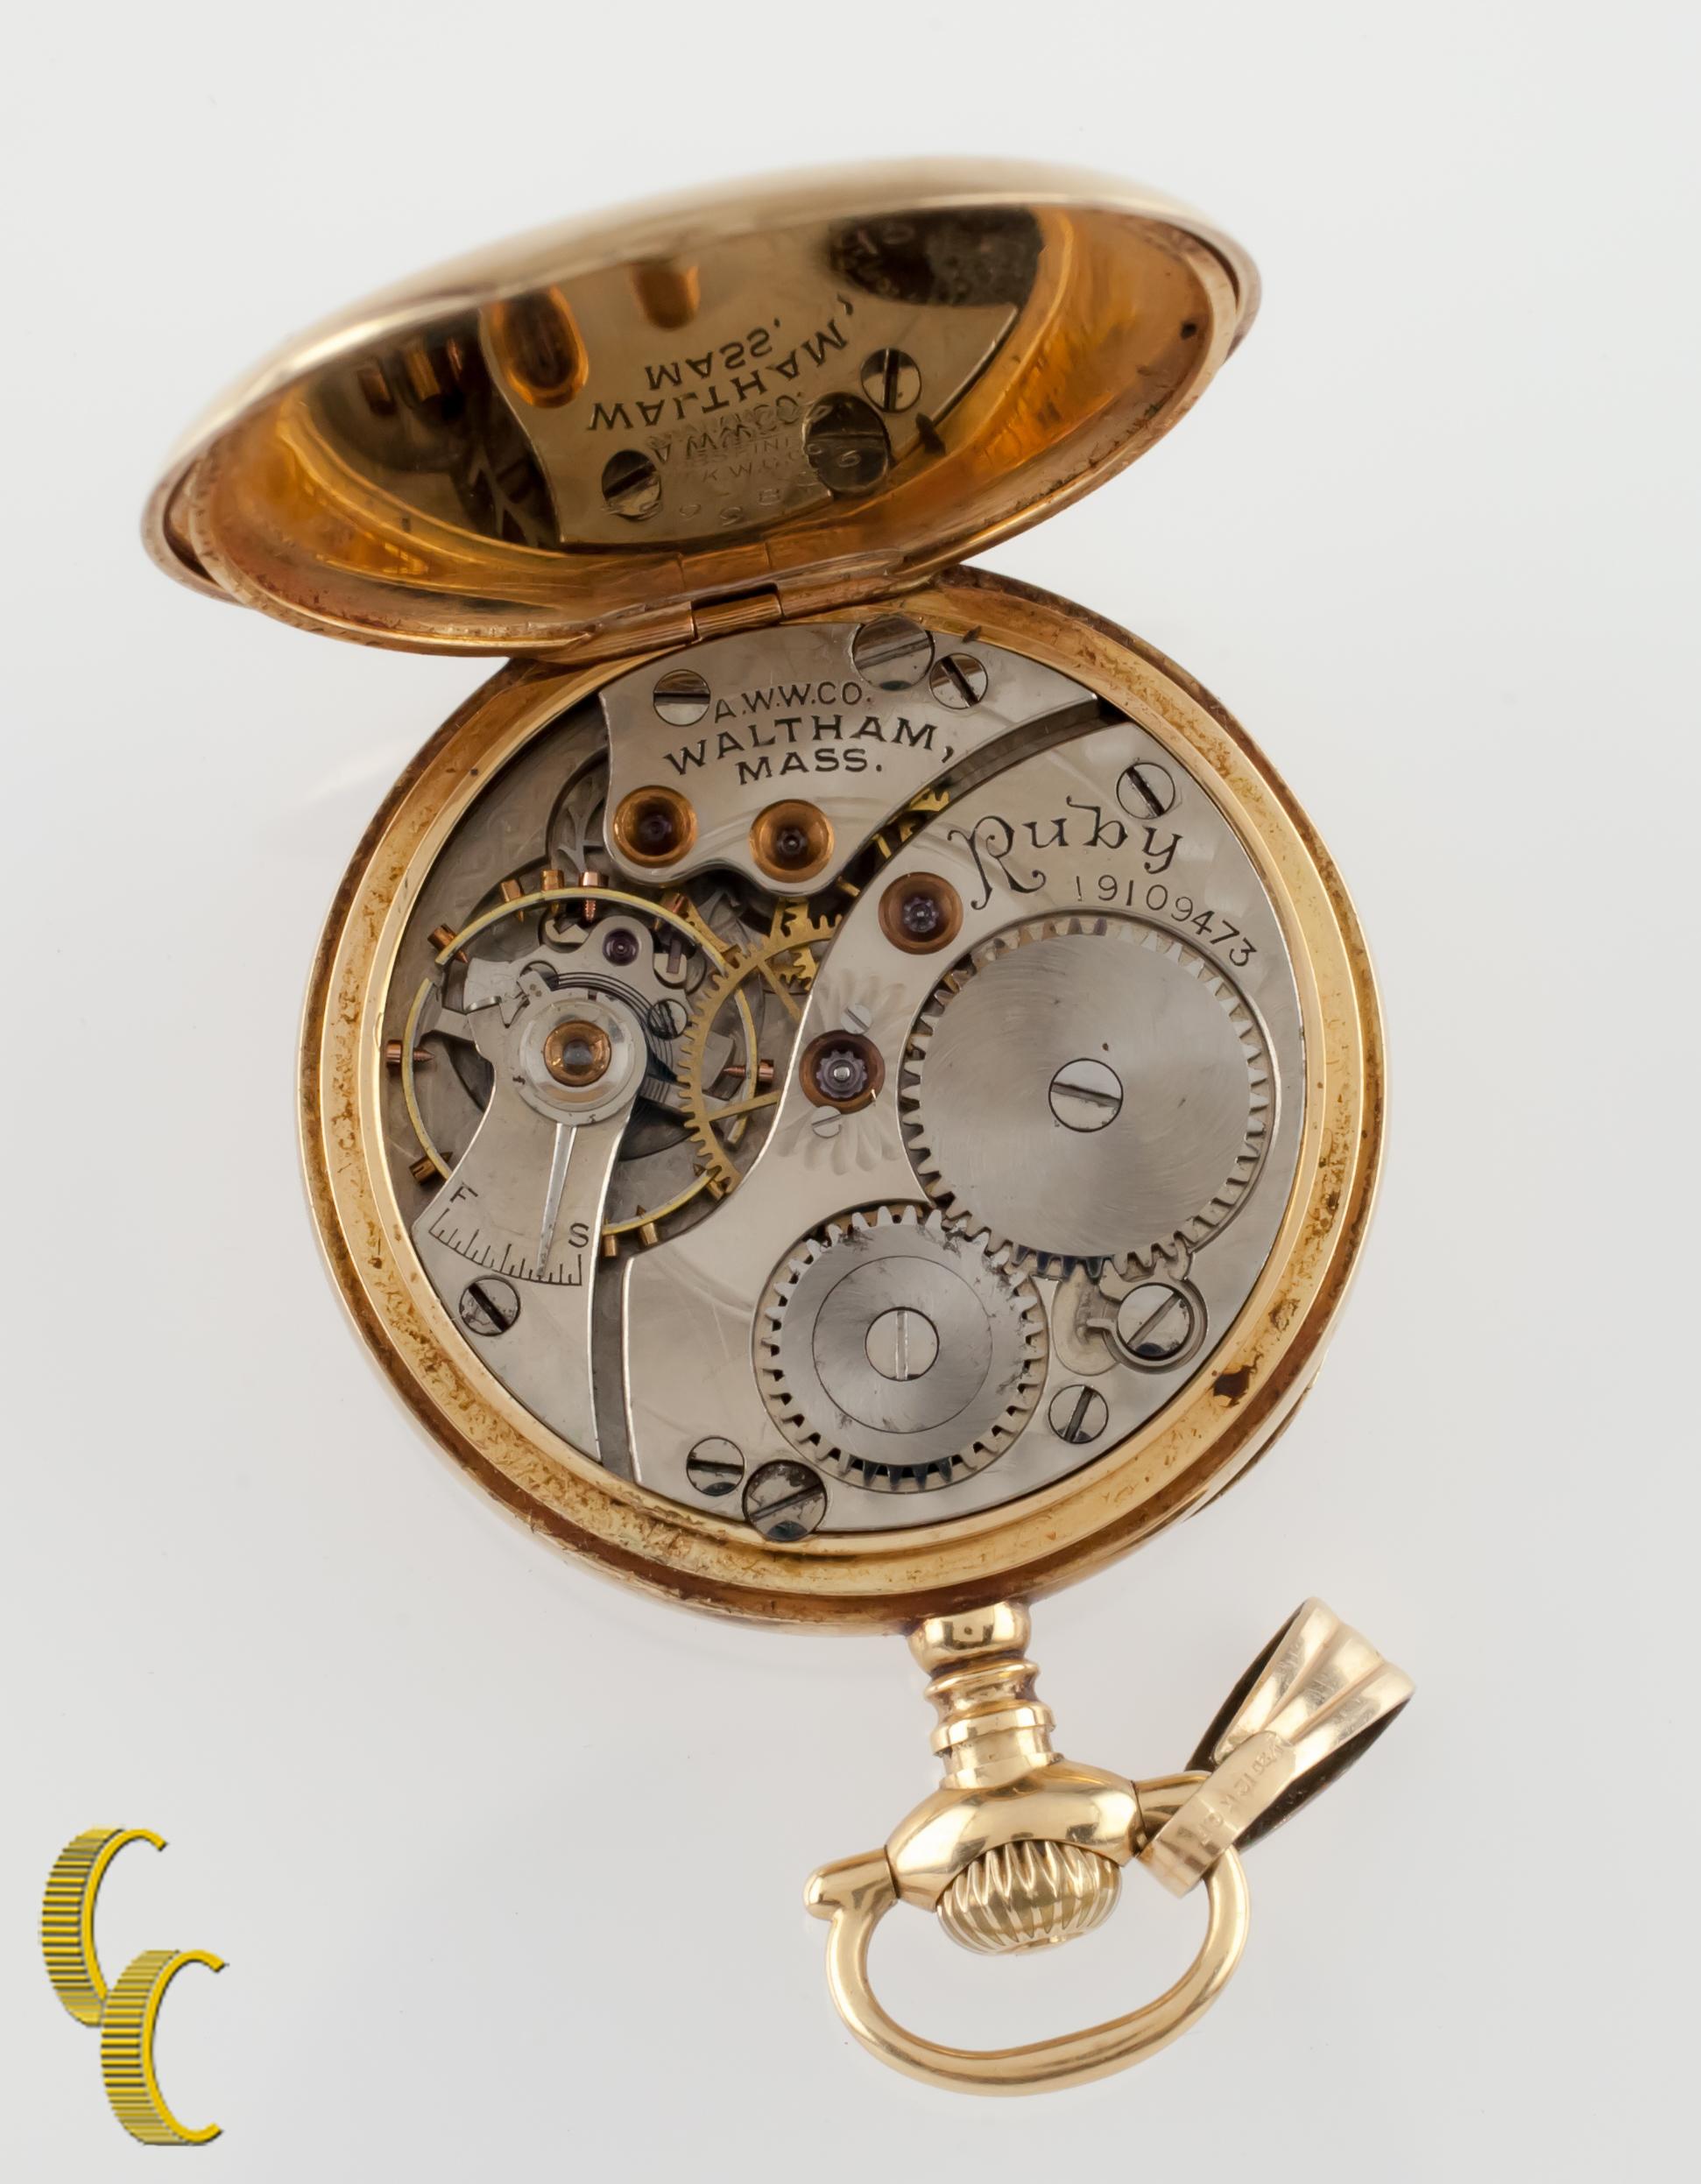 Beautiful Antique Waltham Pocket Watch w/ White Dial Including Black Hands & Dedicated Second Dial
14K Yellow Gold Case w/ Open Face Dial 
Black Script Numerals
Case Serial # 4999886
17-Jewel Waltham Movement Serial # 19109473
Grade # Ruby
Year of